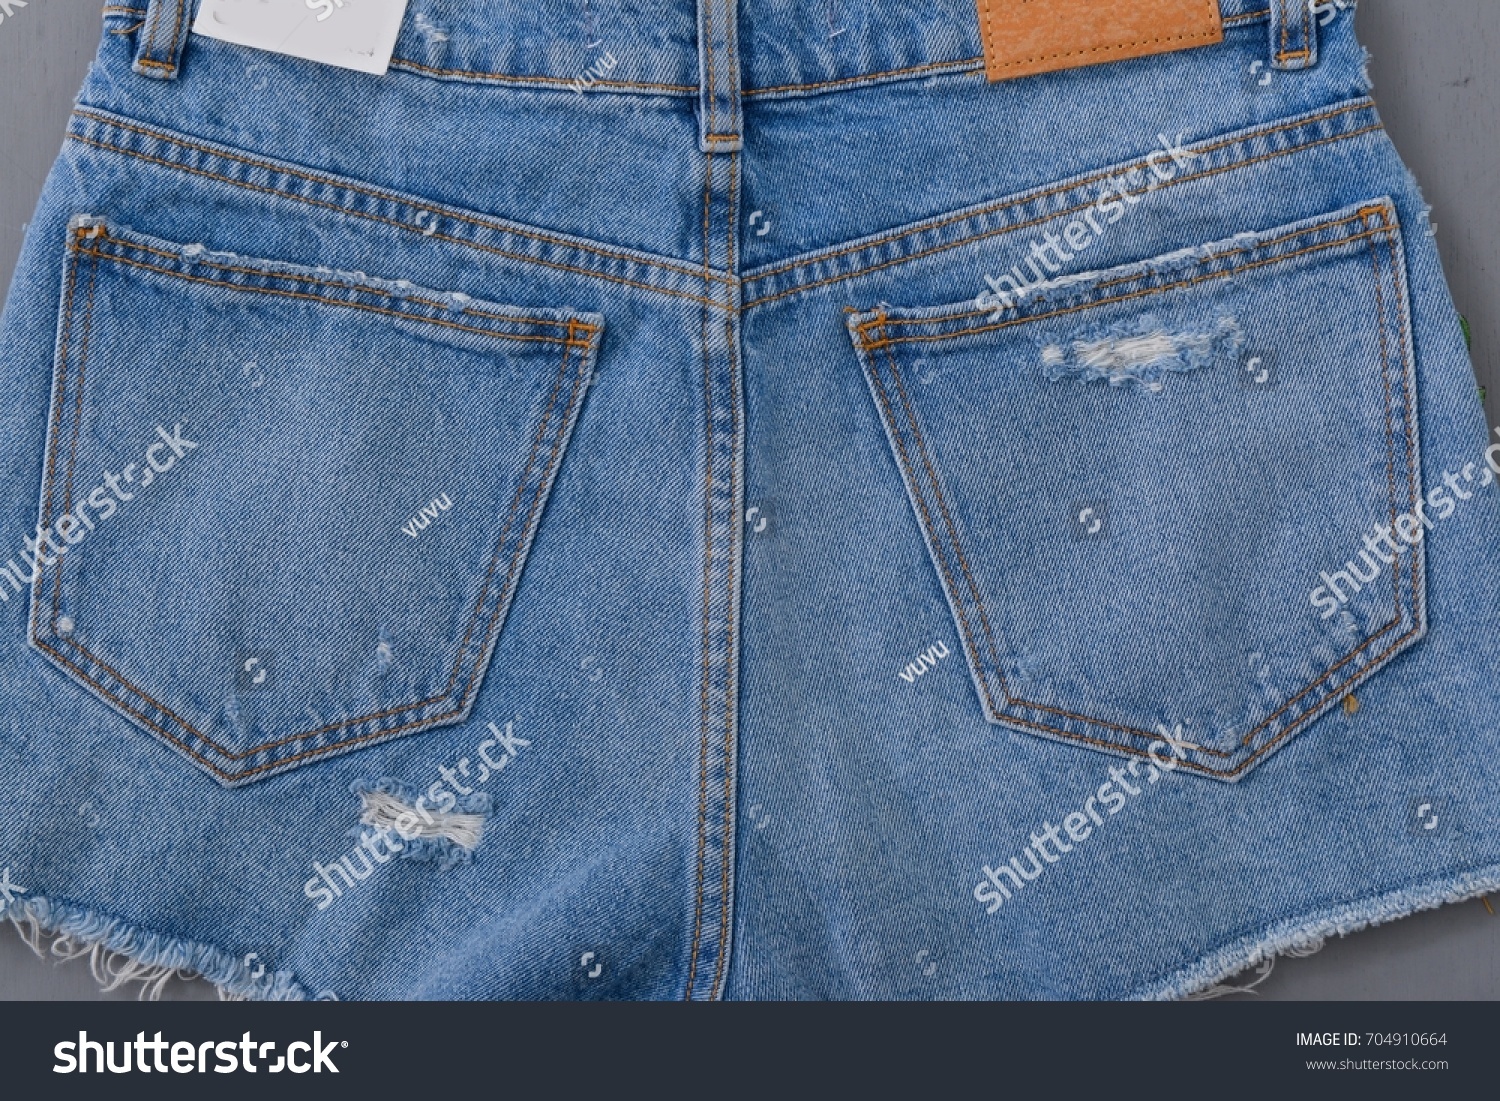 Back View Shorts Jeans Pocket Texture Stock Photo (Edit Now) 704910664